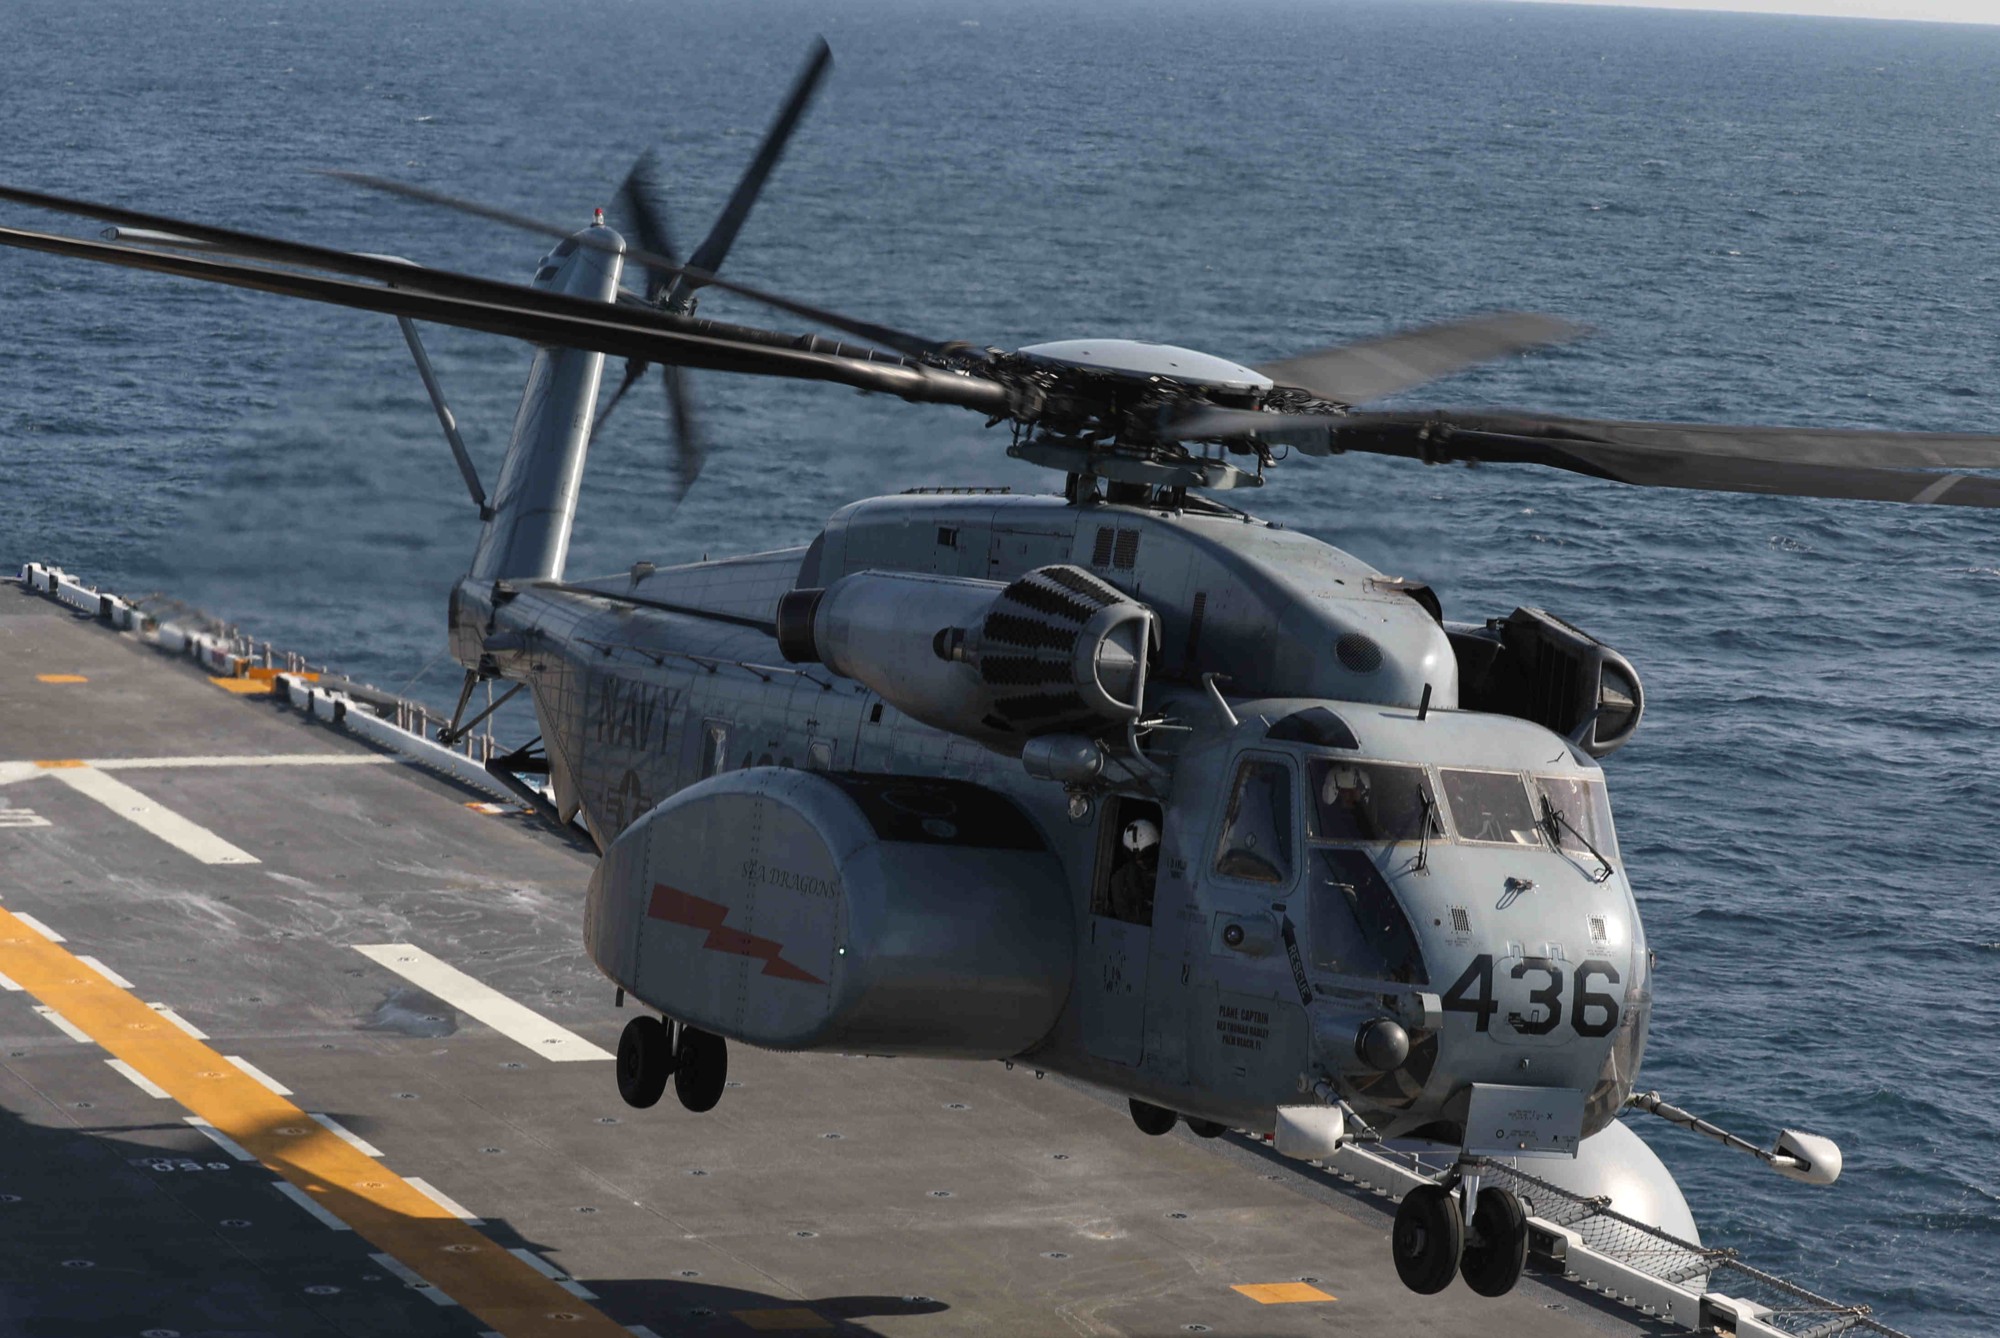 hm-12 sea dragons helicopter mine countermeasures squadron navy mh-53d uss bataan lhd-5 45